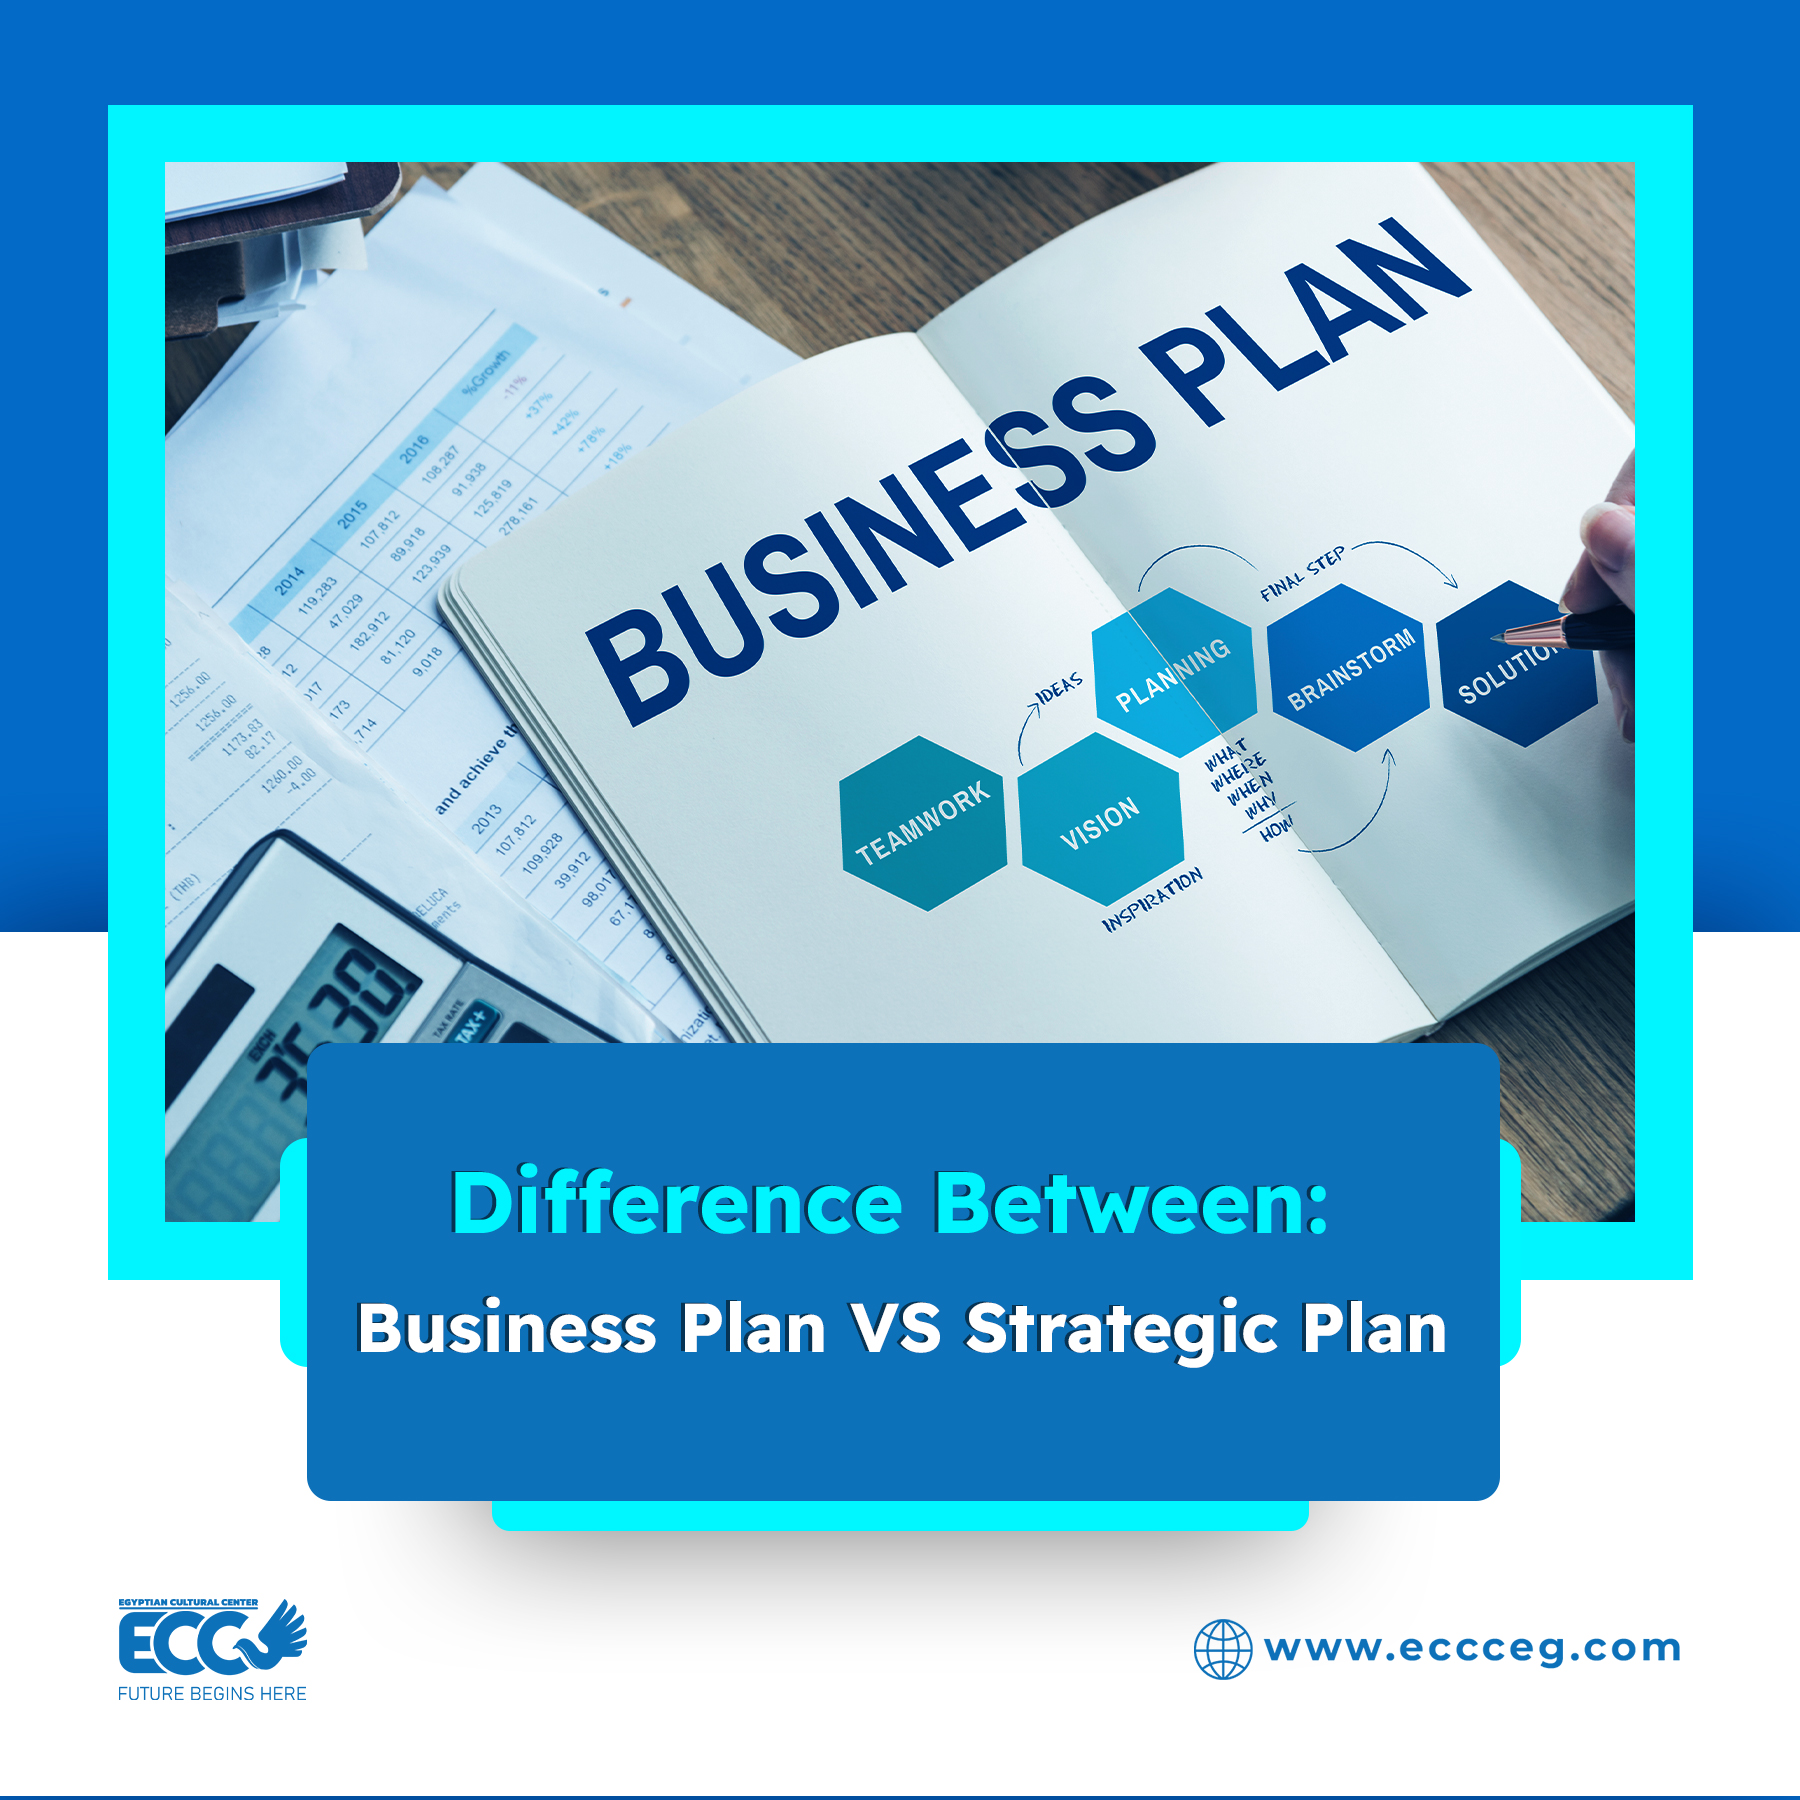 Difference Between: Business Plan VS Strategic Plan